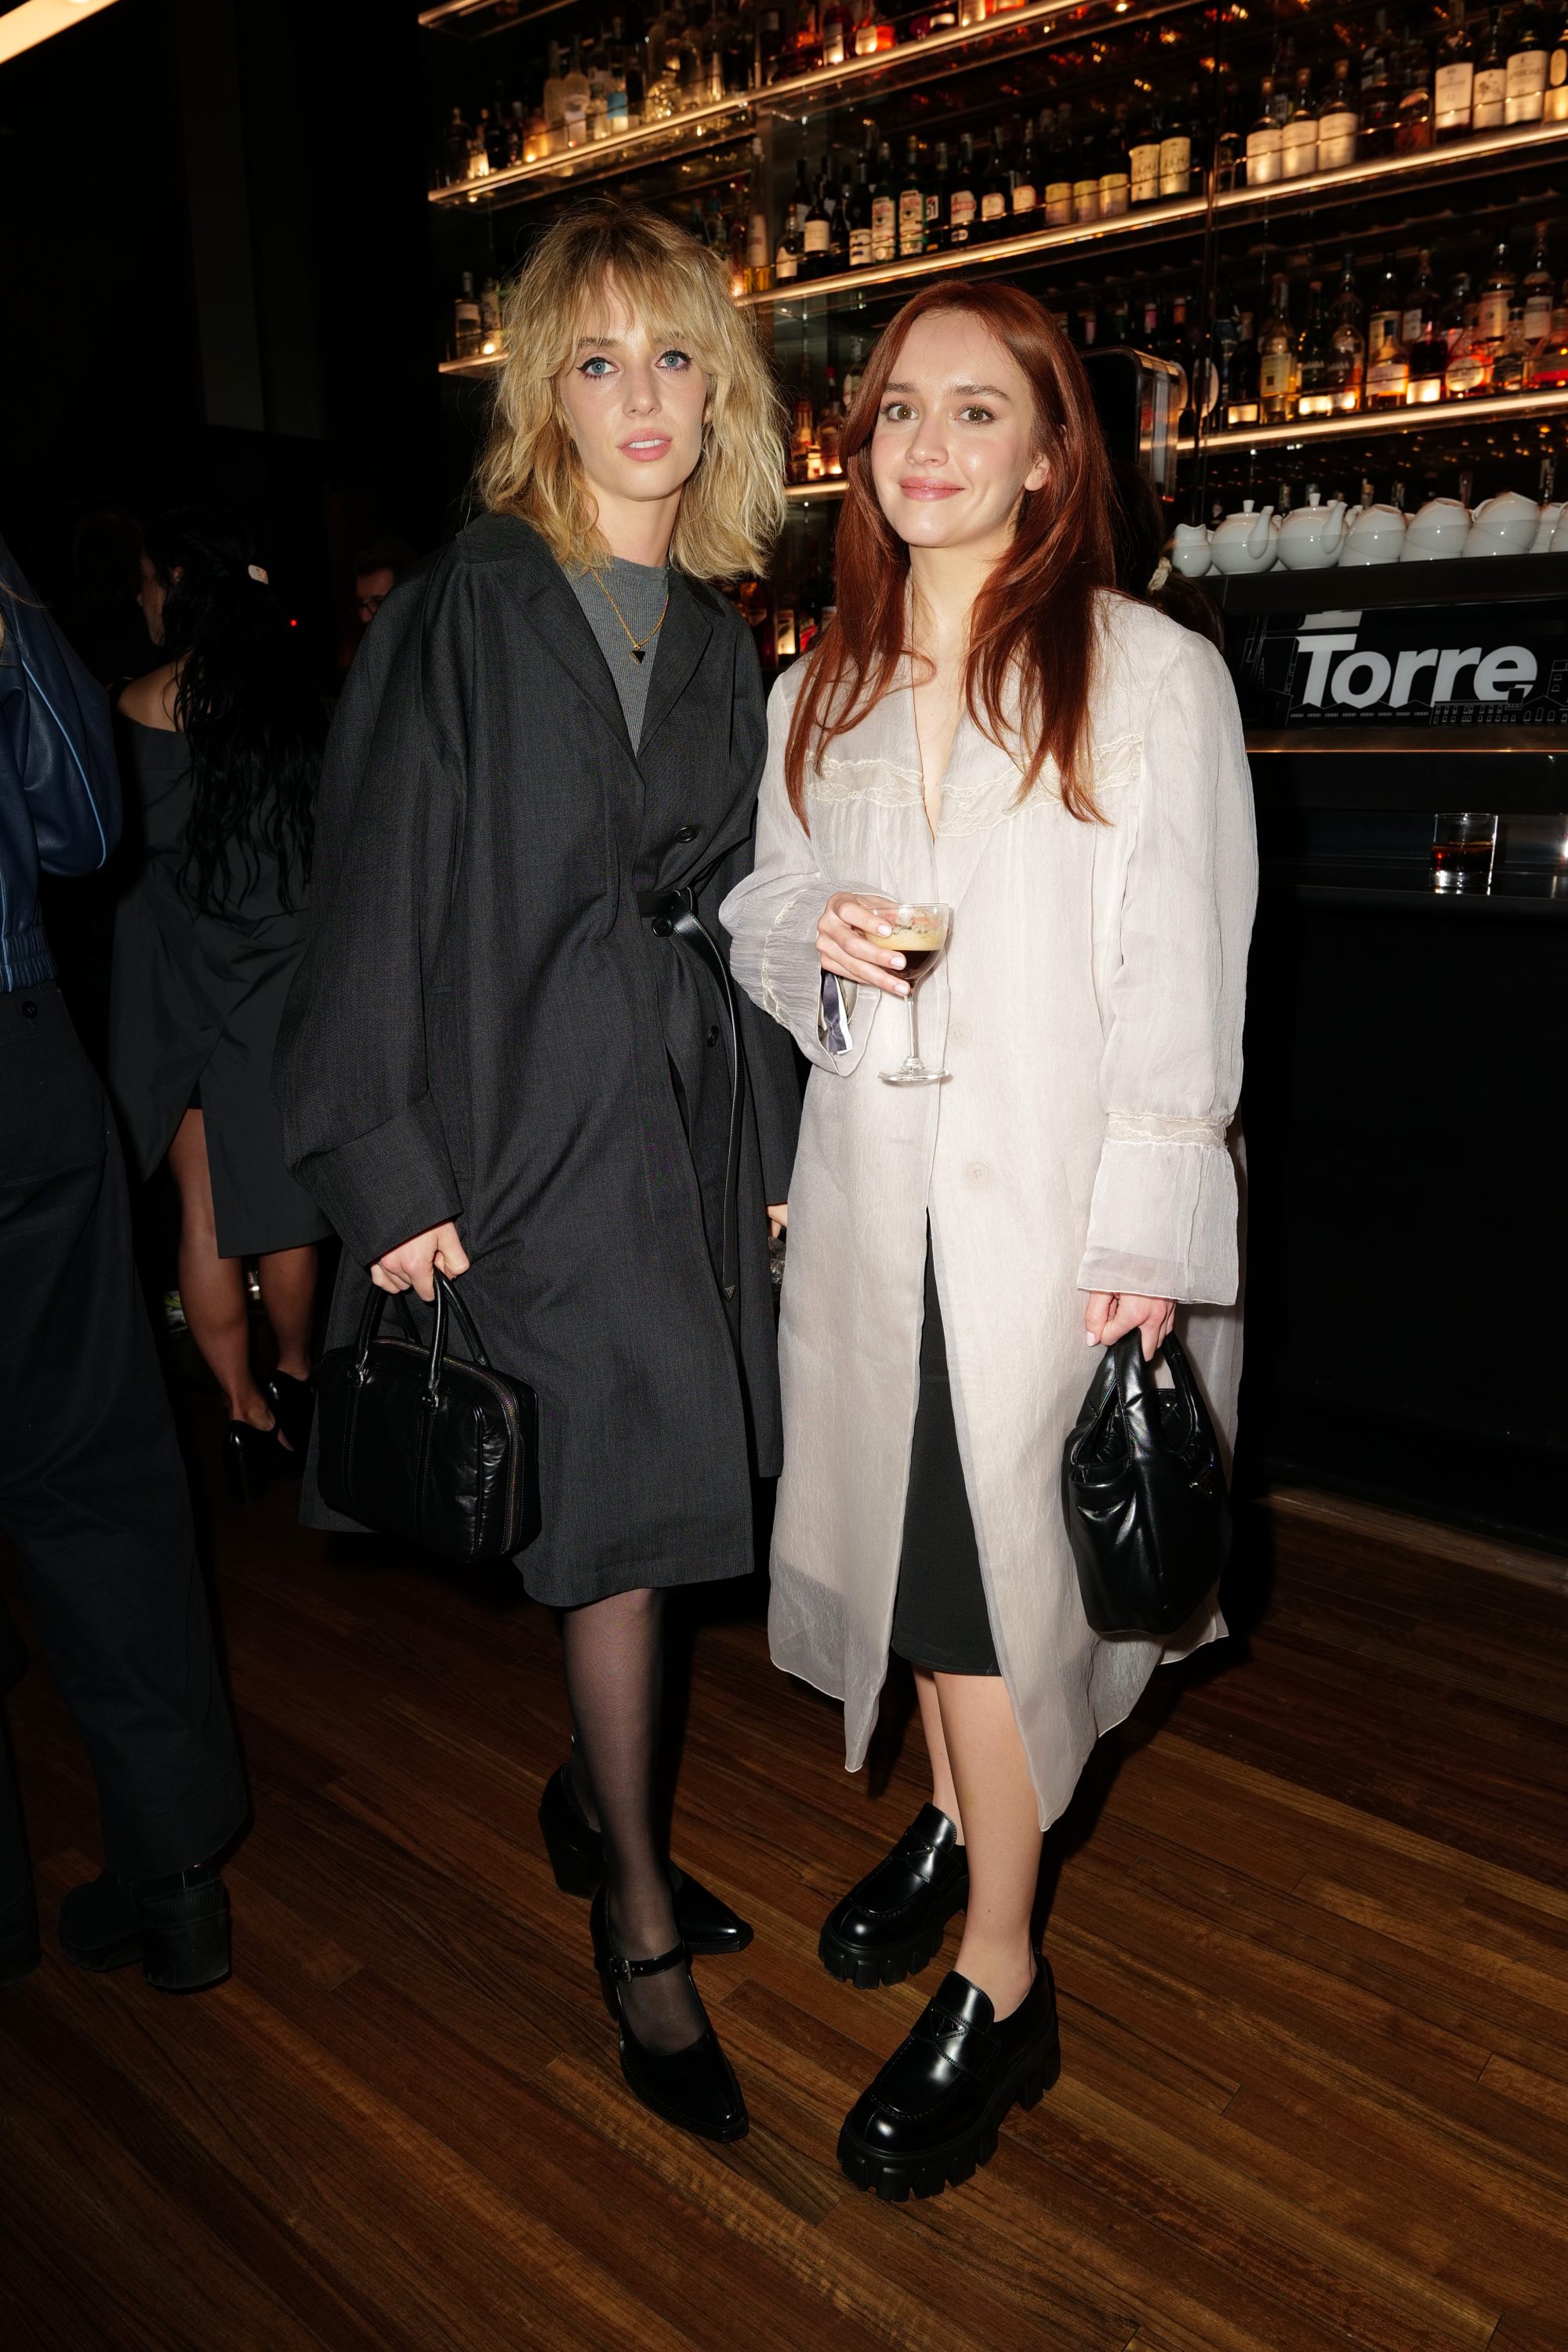 Prada Hosts FW23 Dinner & After-Party At Ristorante Torre | The Impression